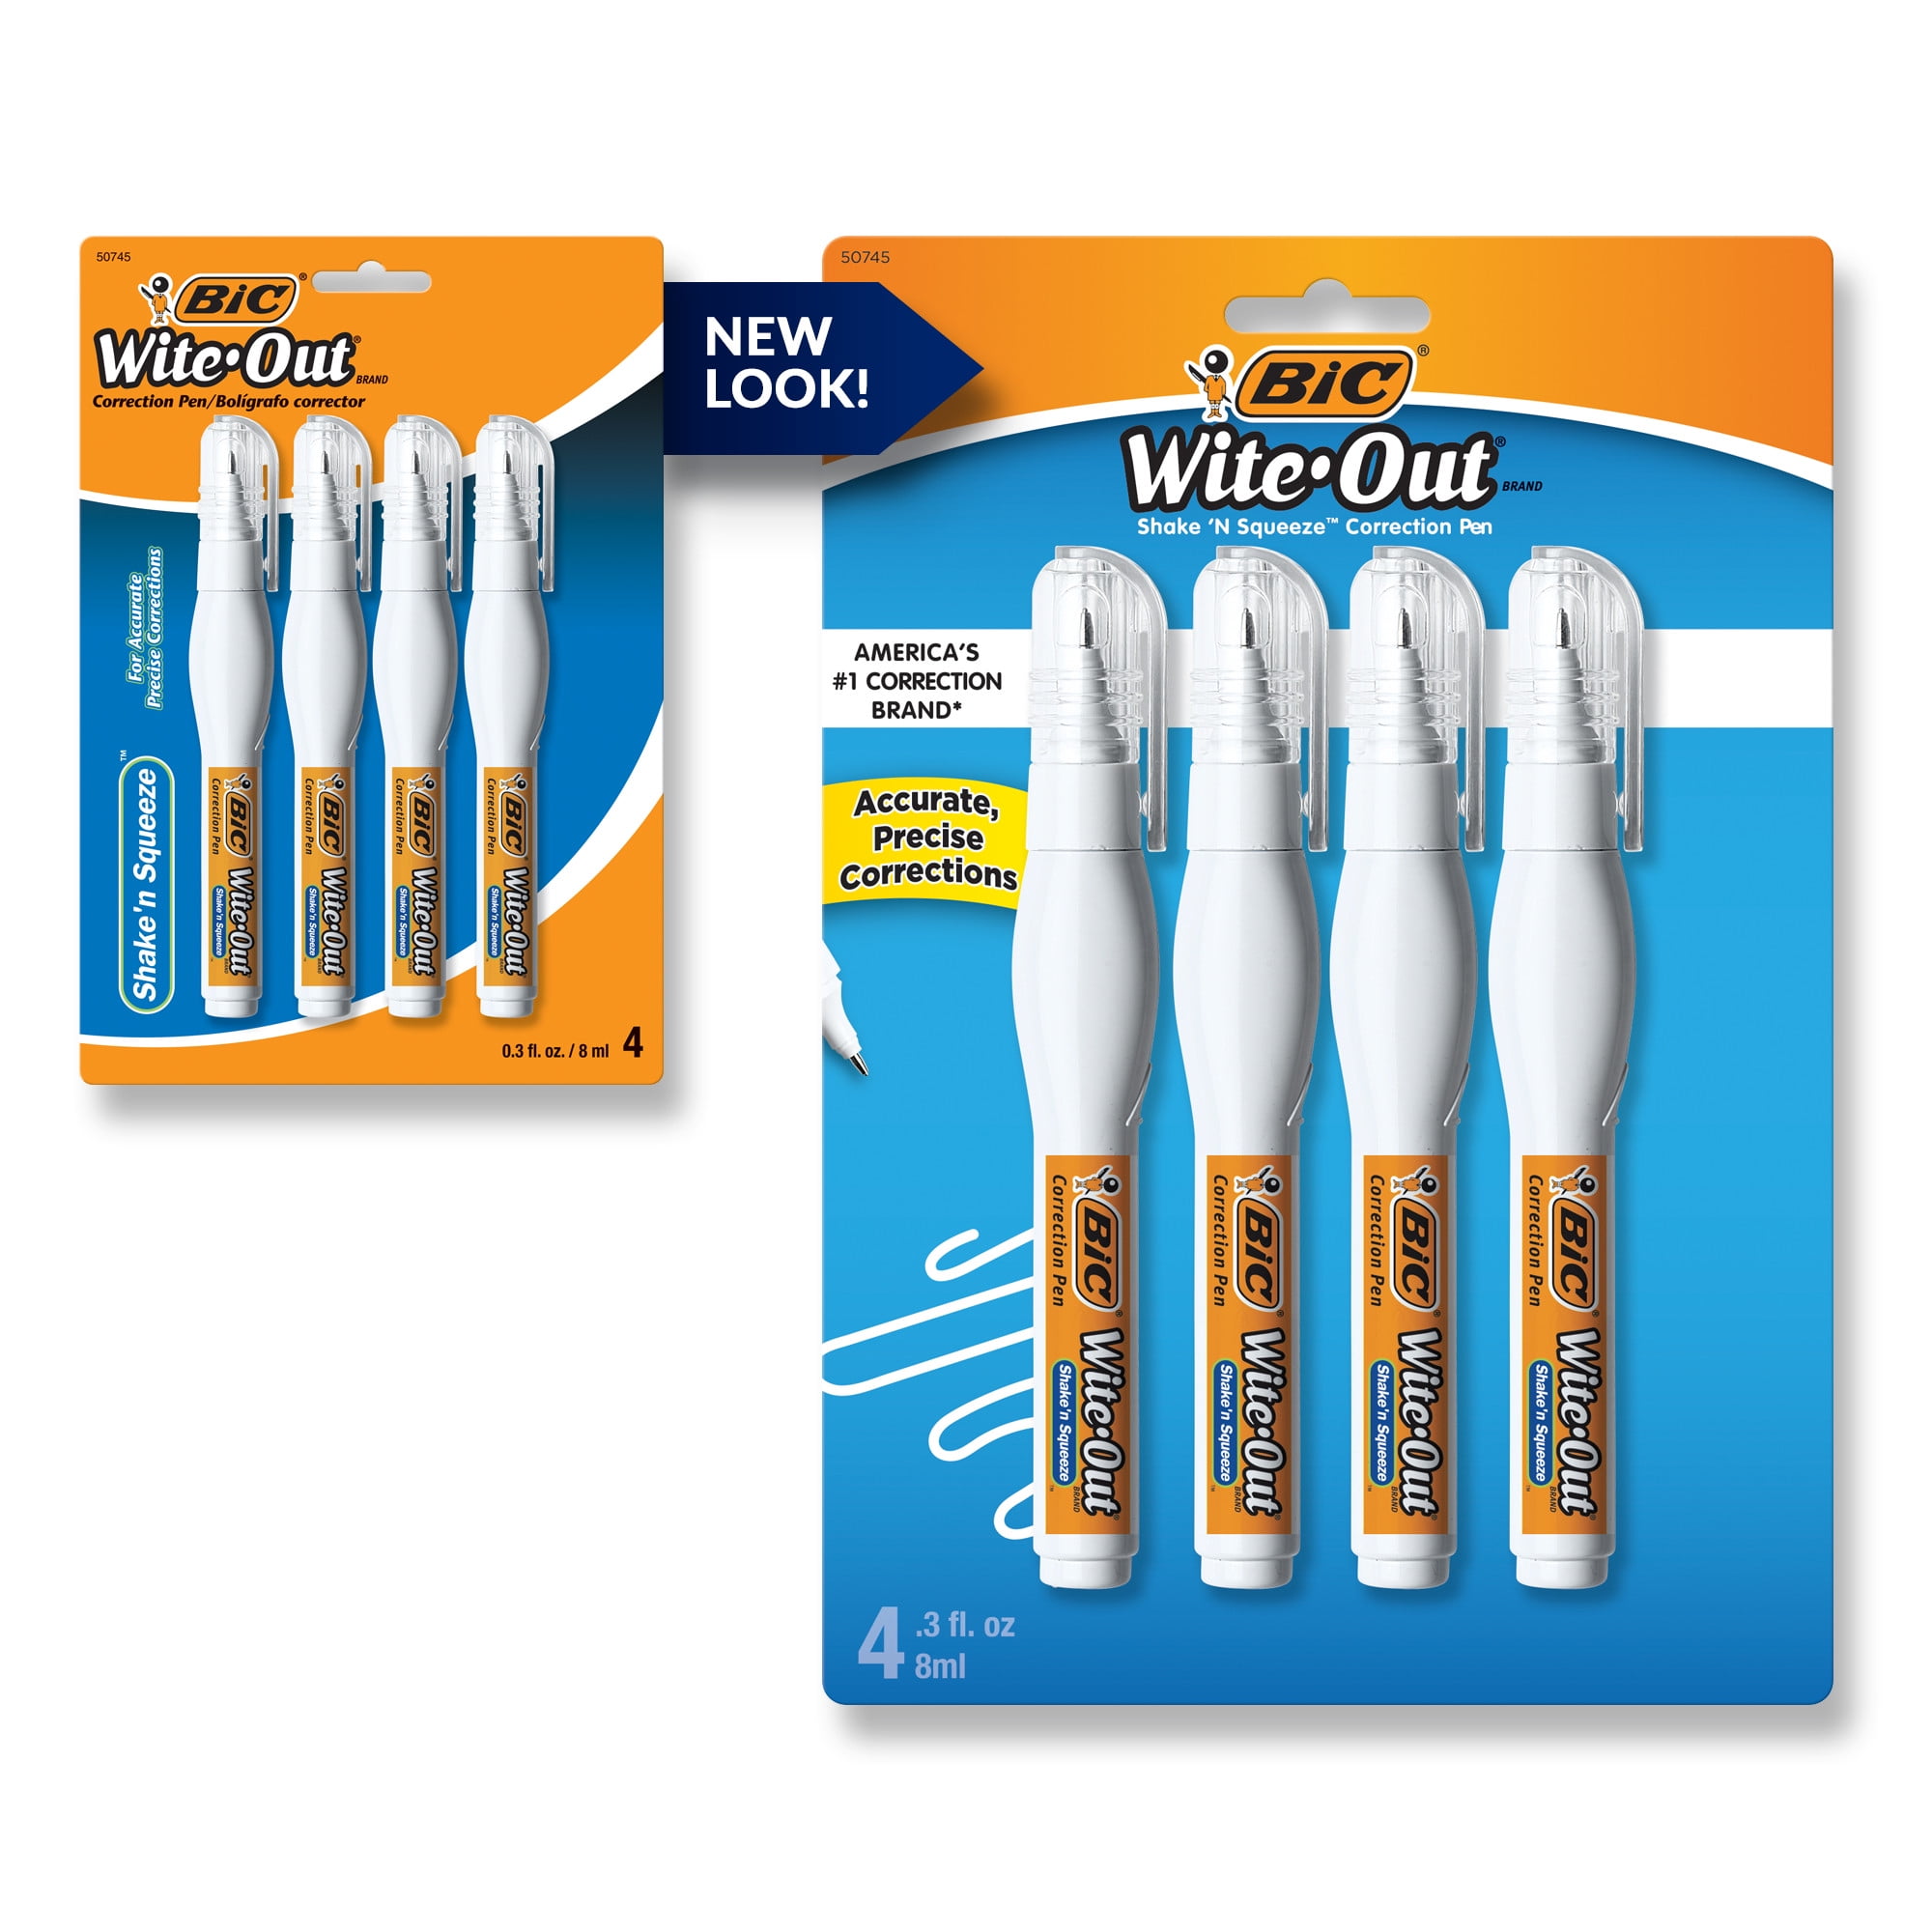 Bic Wite-Out Shake 'n Squeeze Correction Pen 8 ml White 4/Pack WOSQPP418